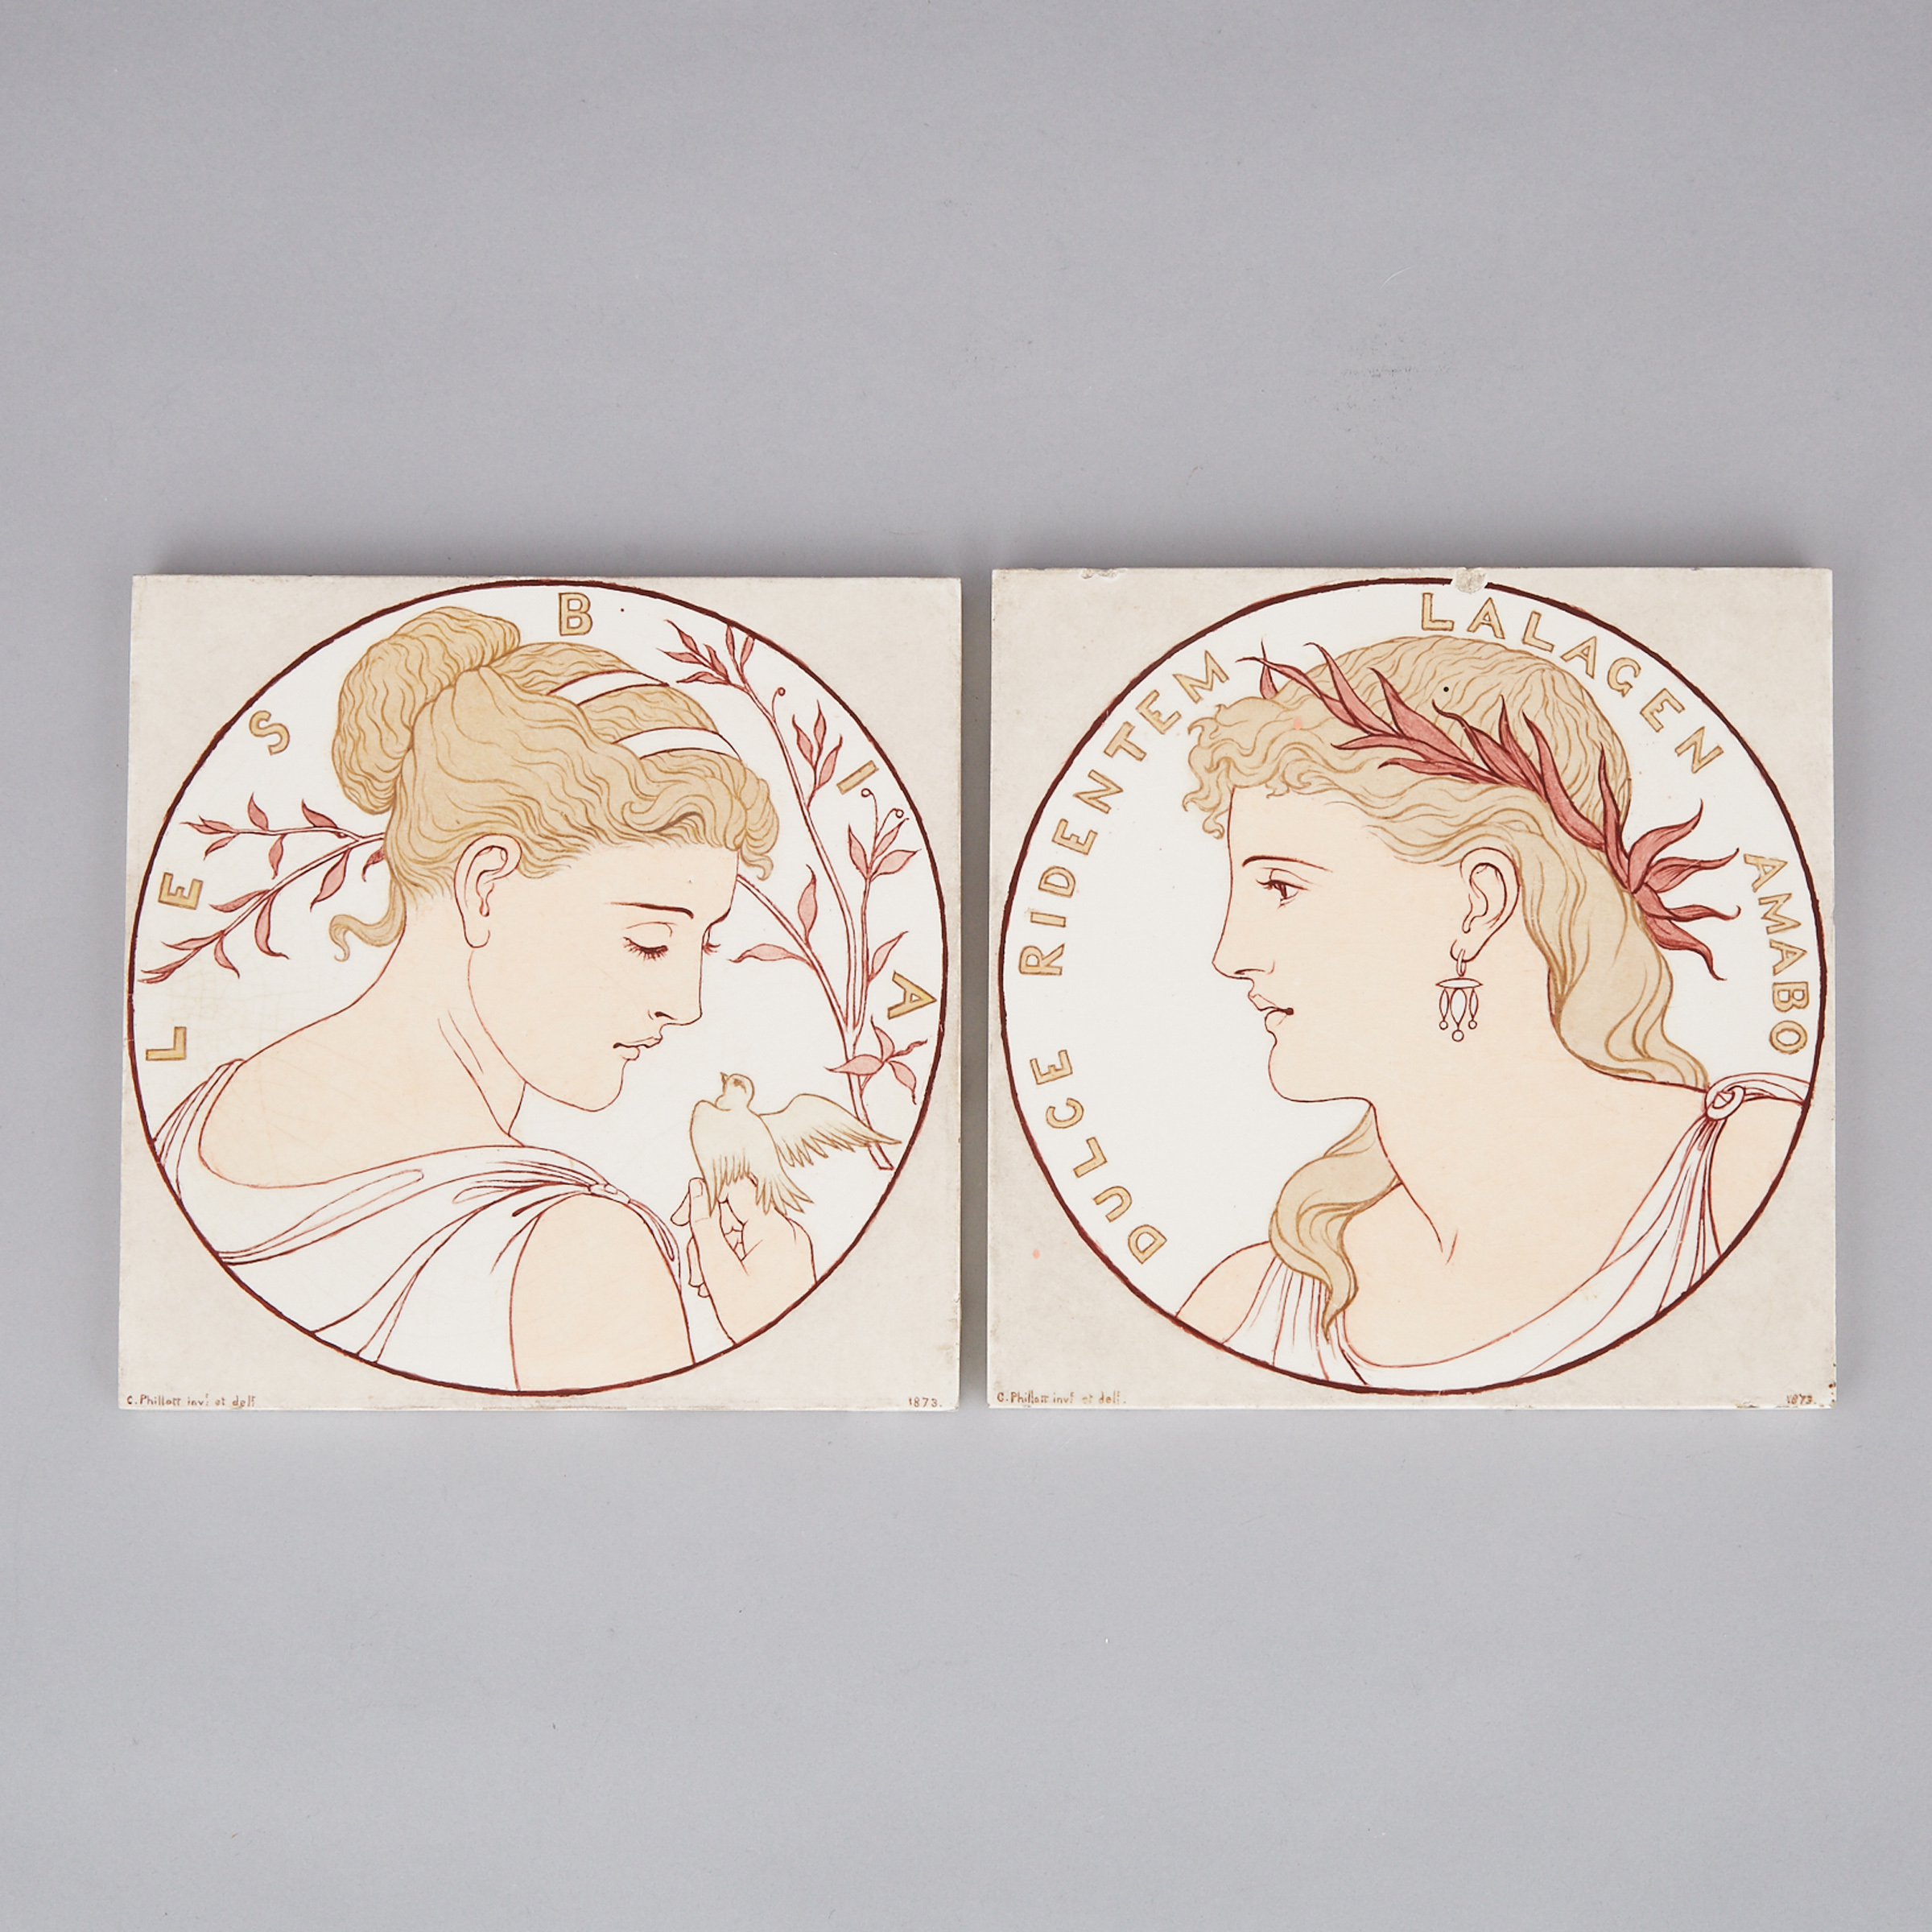 Pair of English Pottery Tiles, 1873